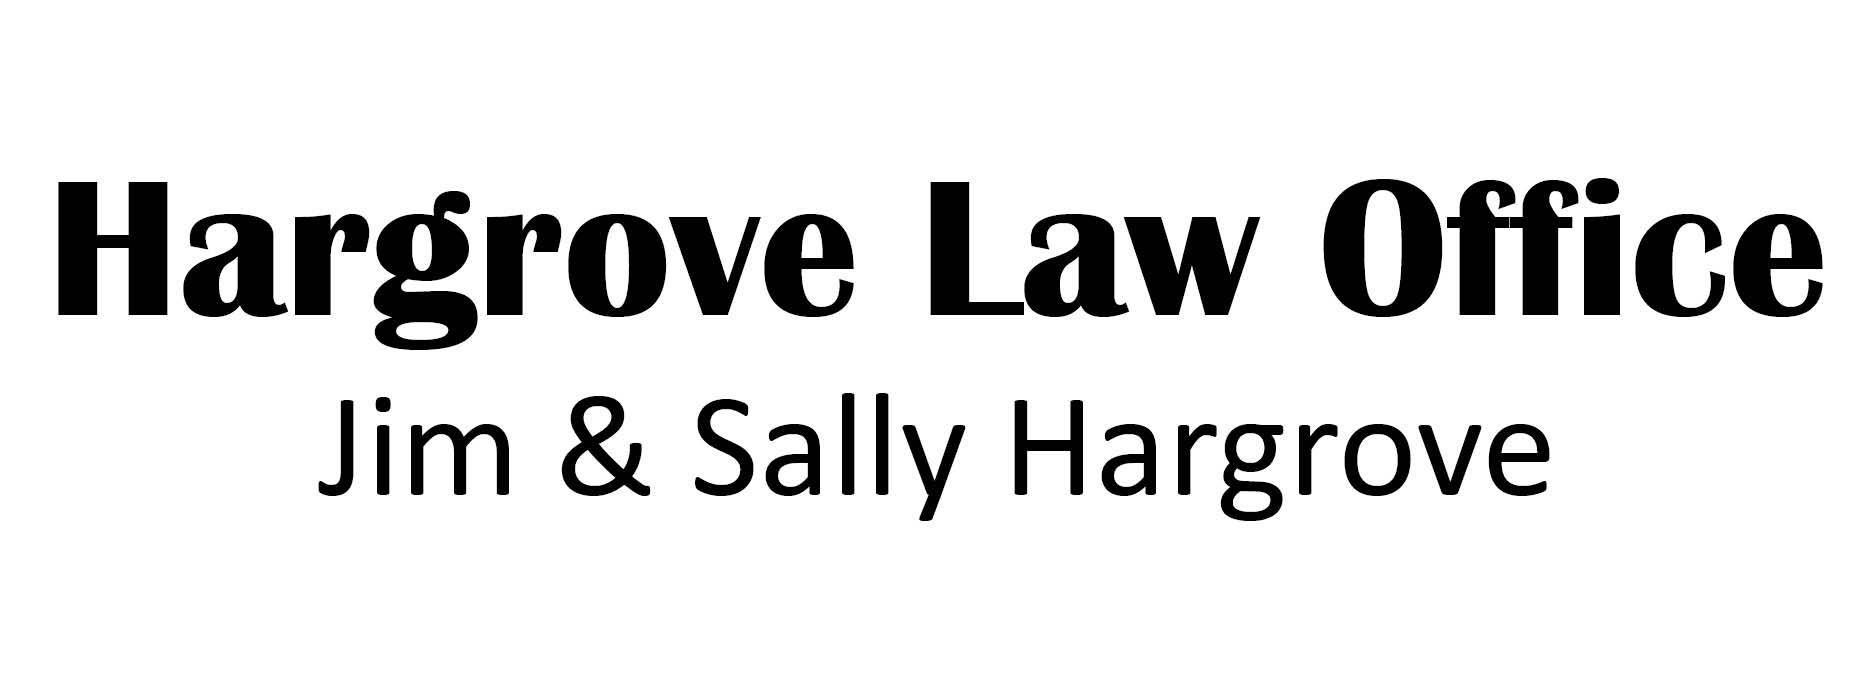 Hargrove Law Office